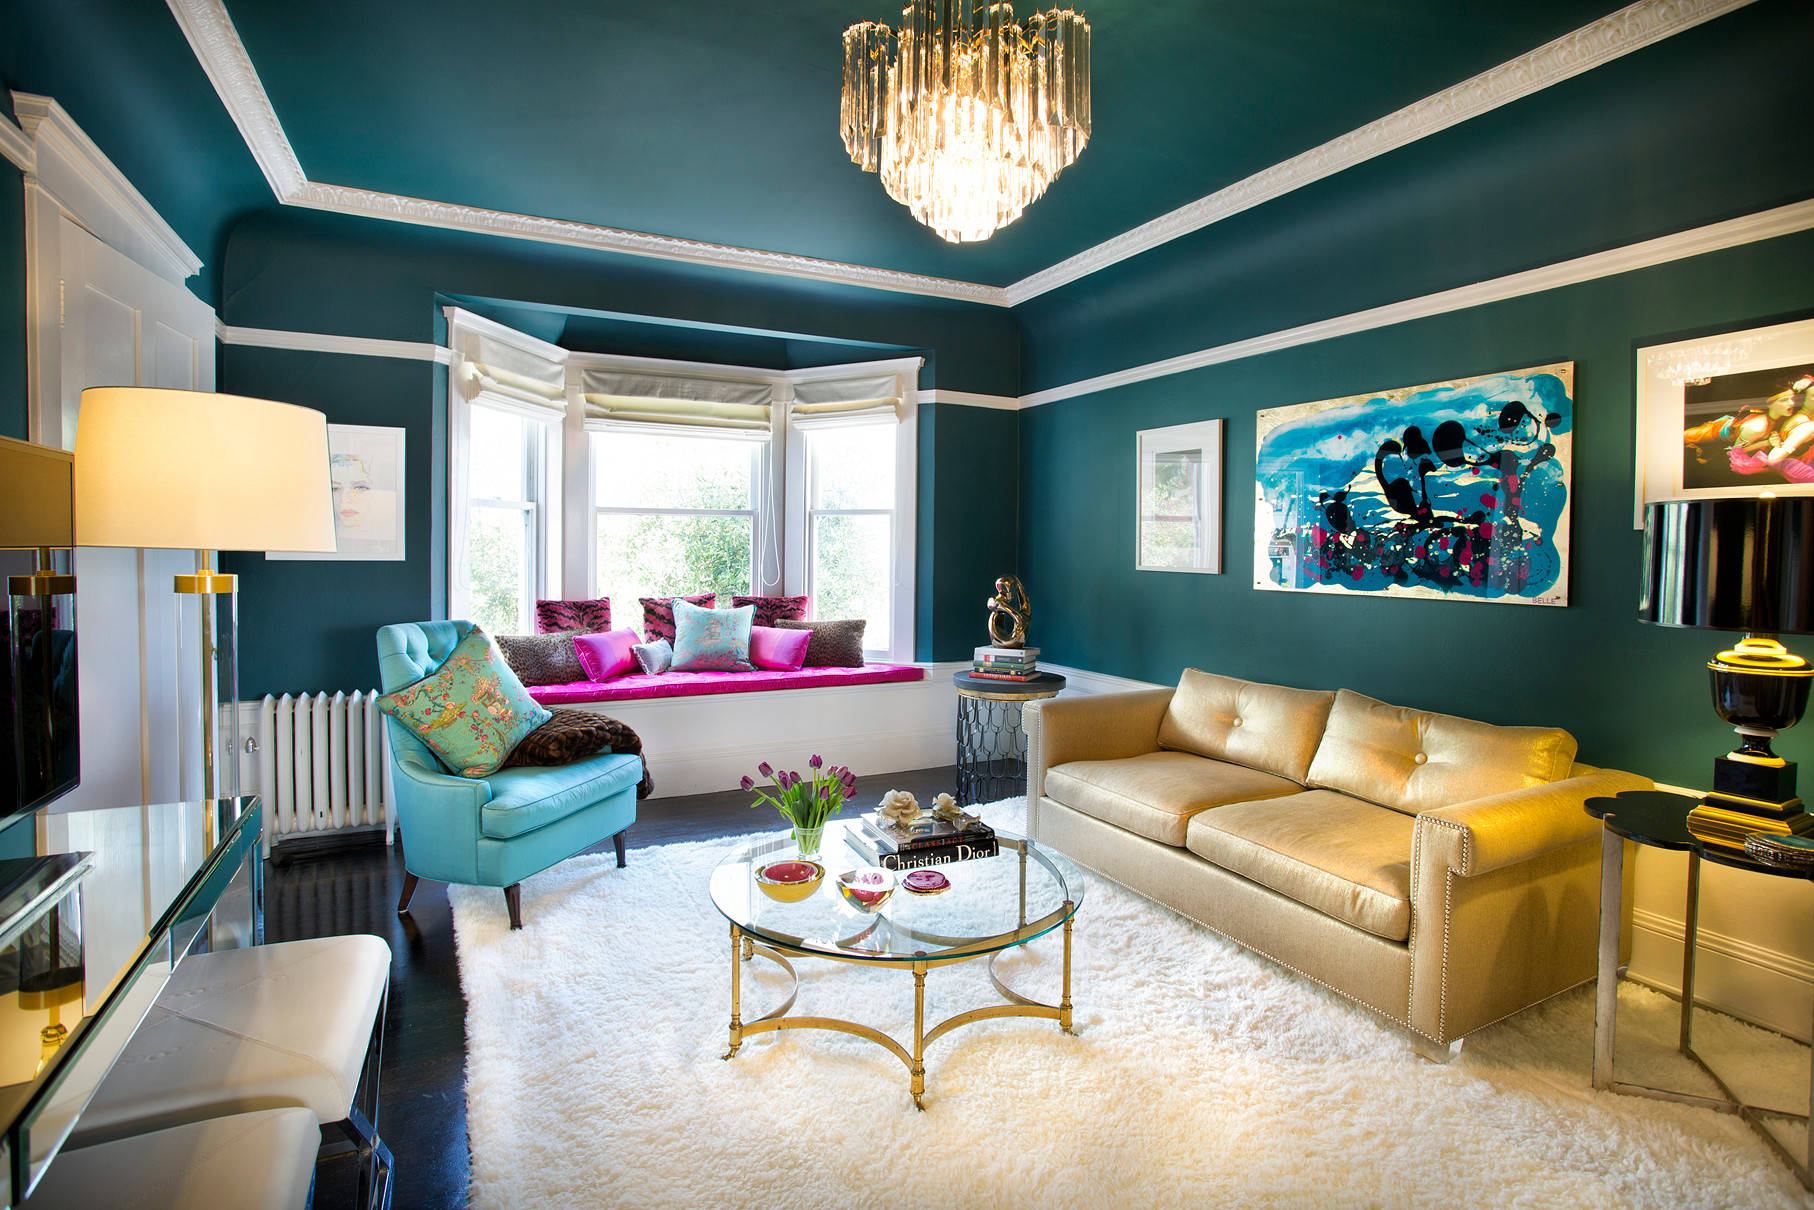 Teal And Pink - Photos & Ideas | Houzz